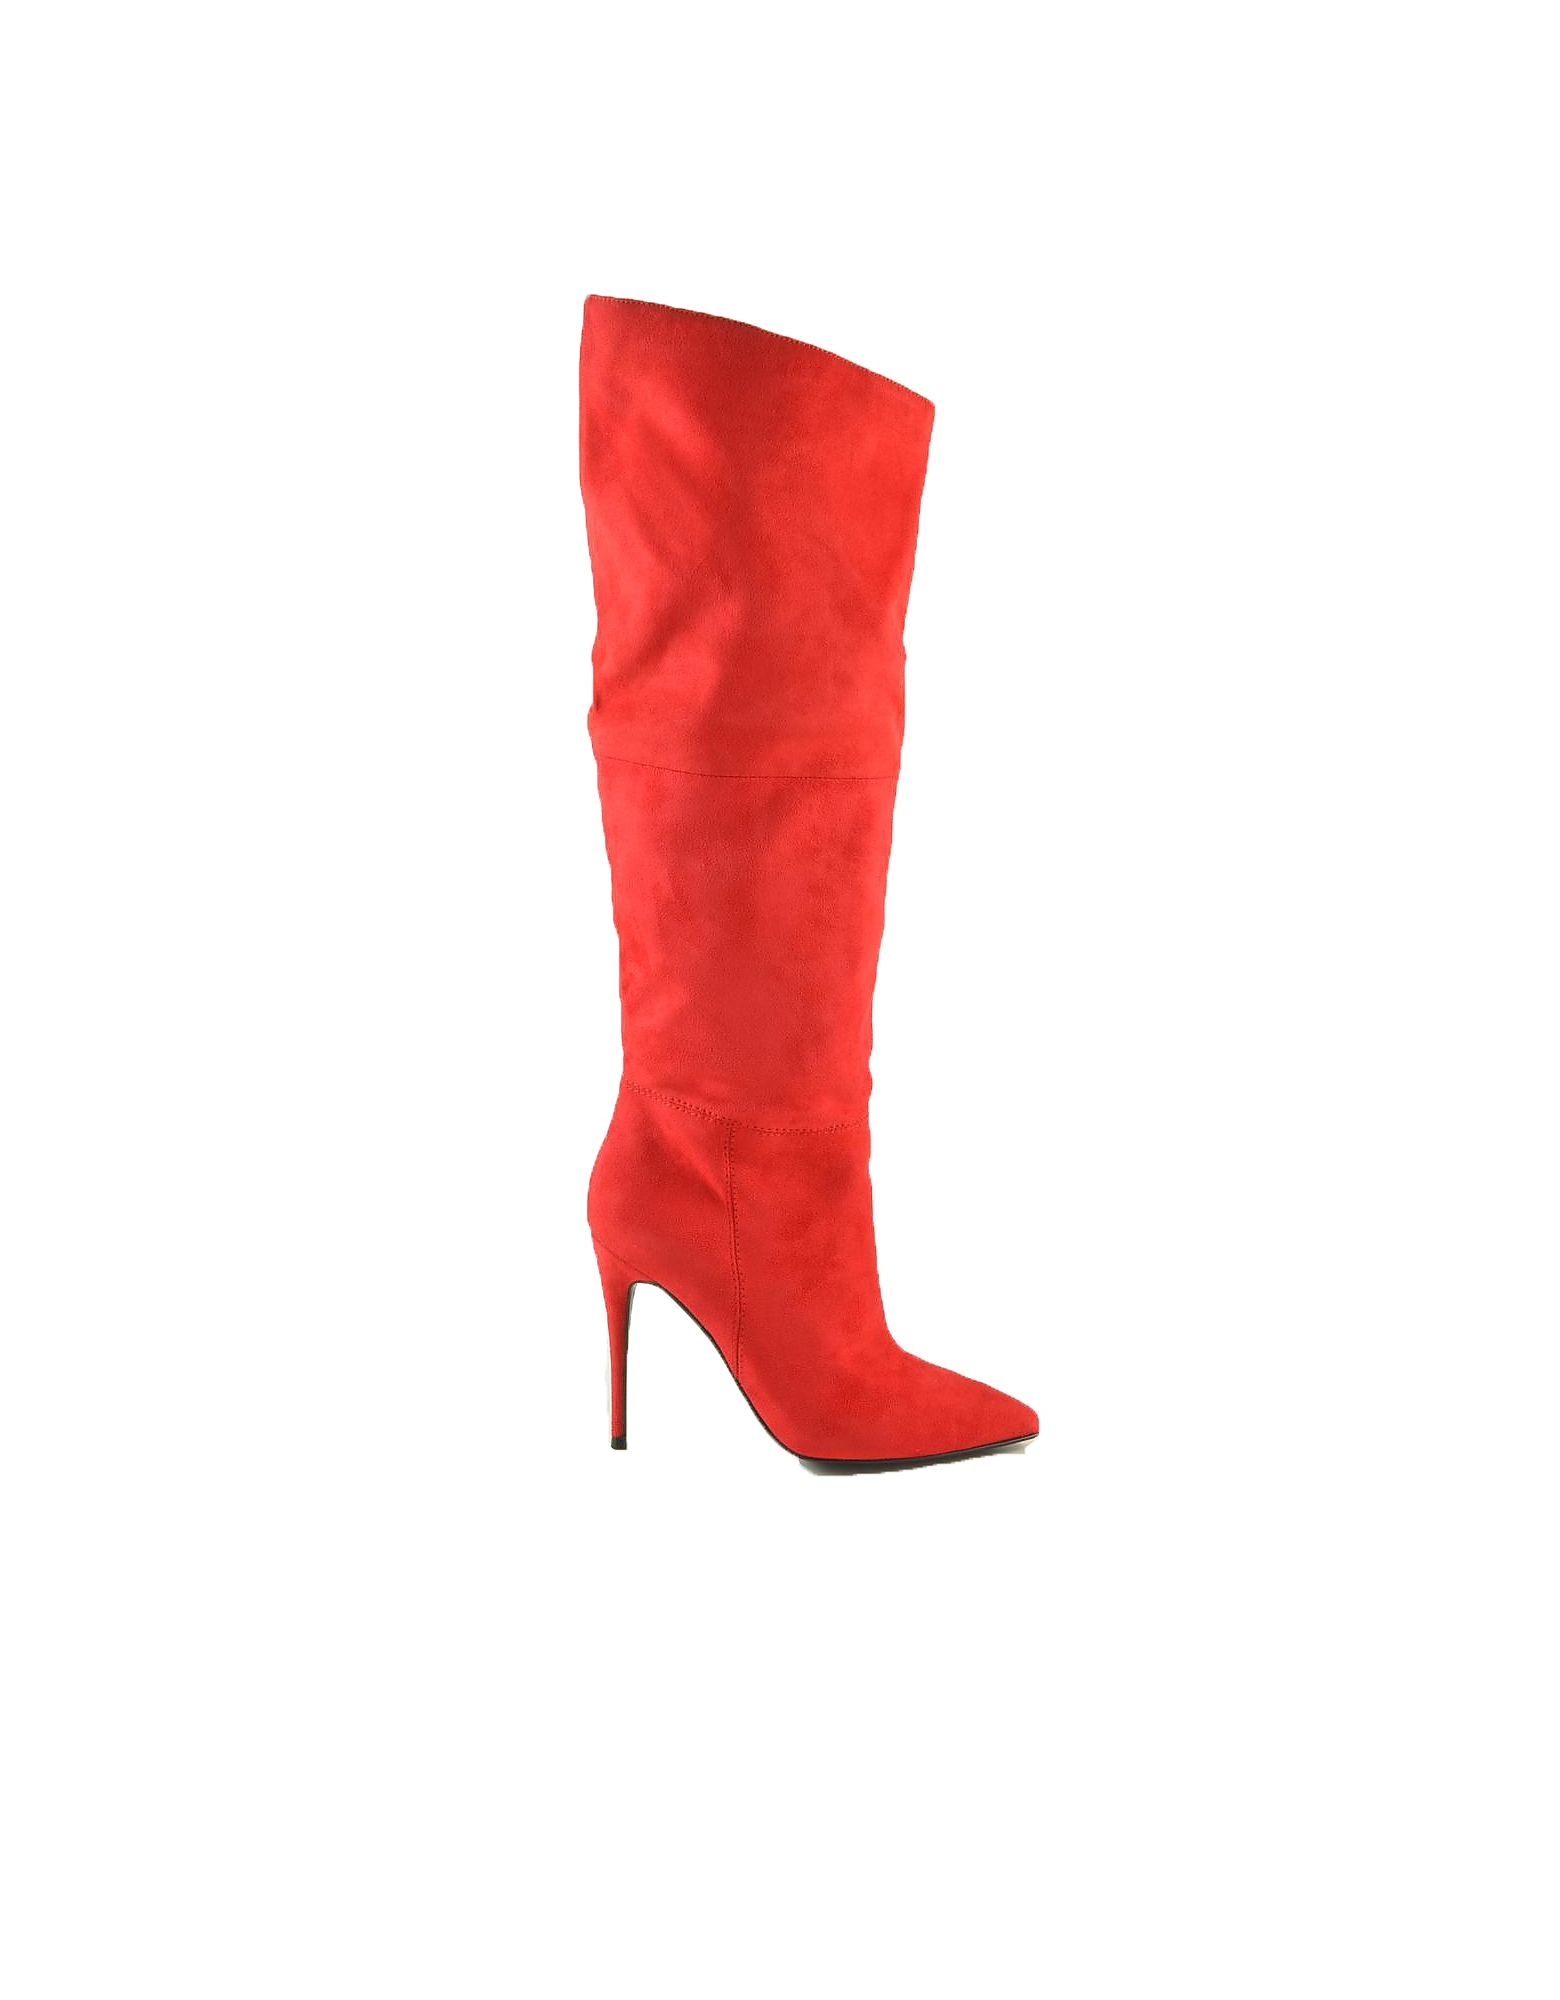 Steve Madden  Shoes Women's Red Boots